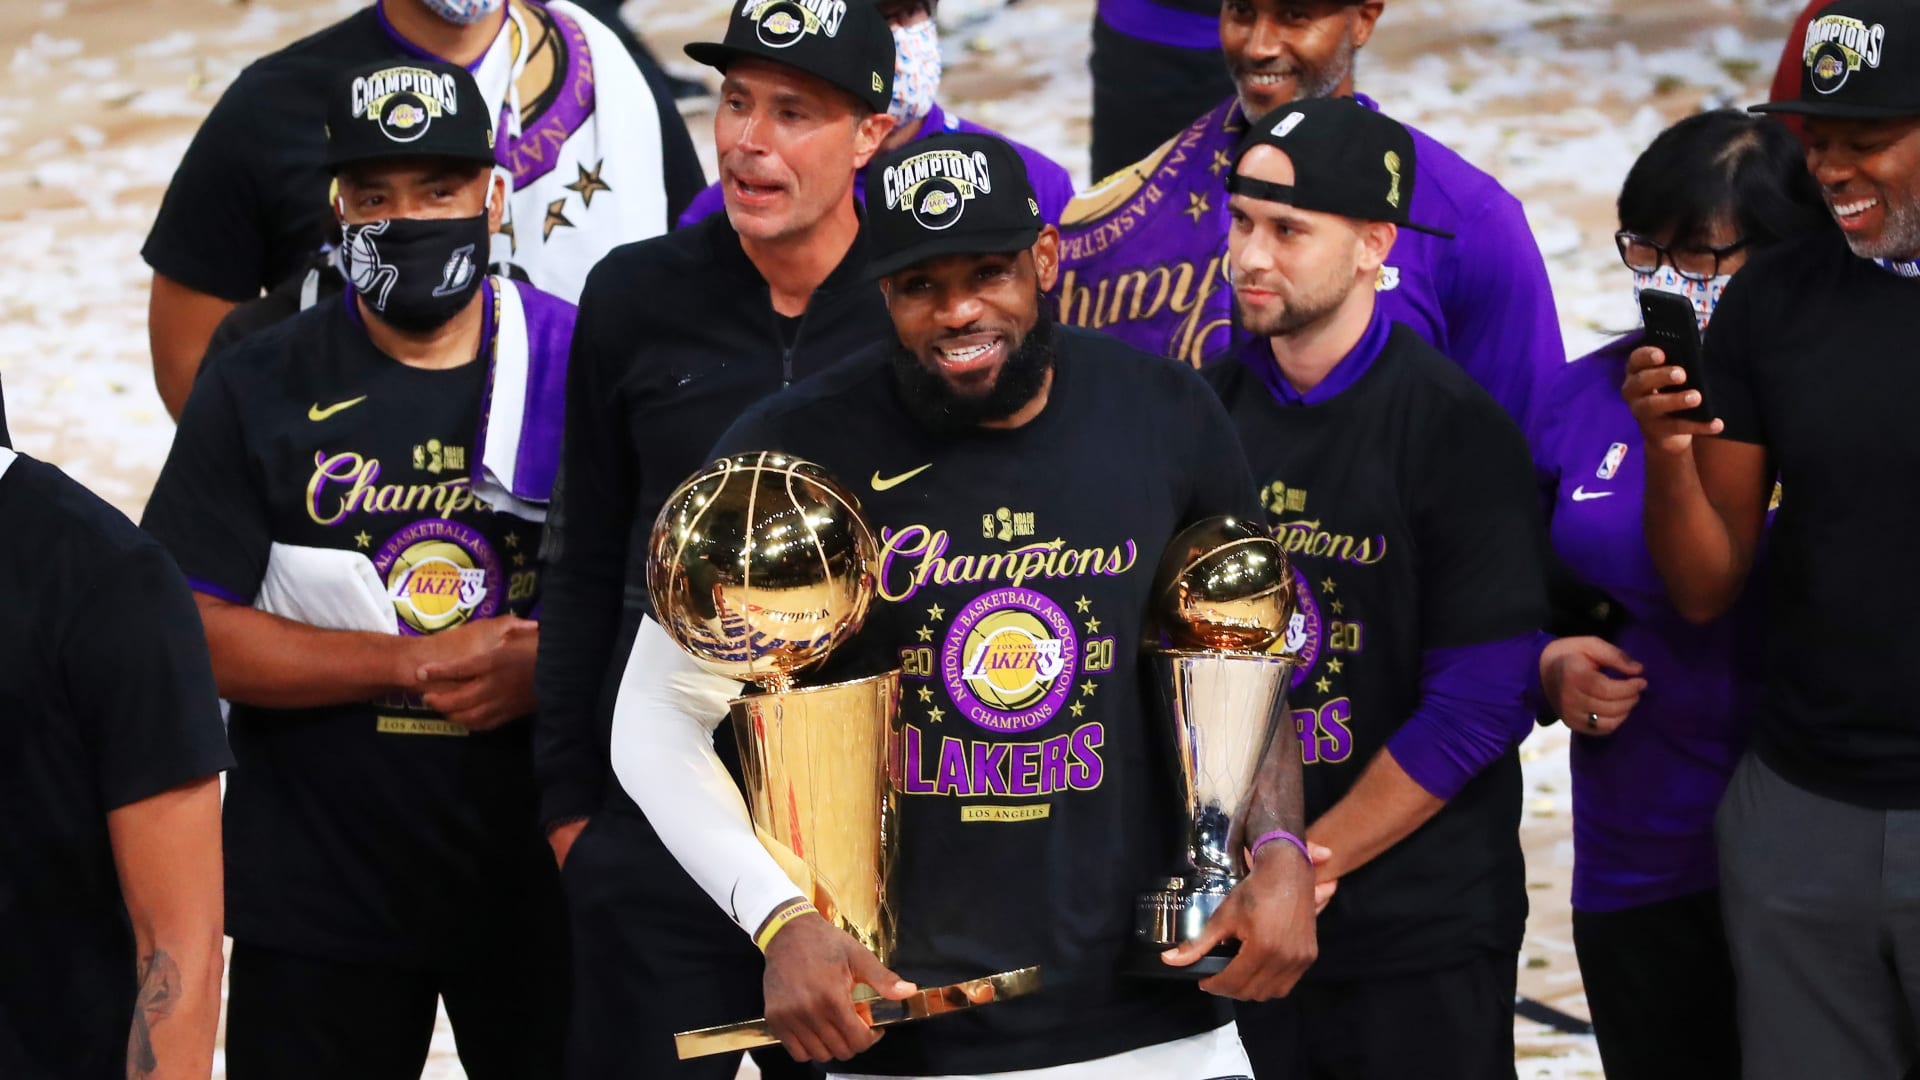 Lakers’ Public Title Celebration Has to Wait Due to COVID-19